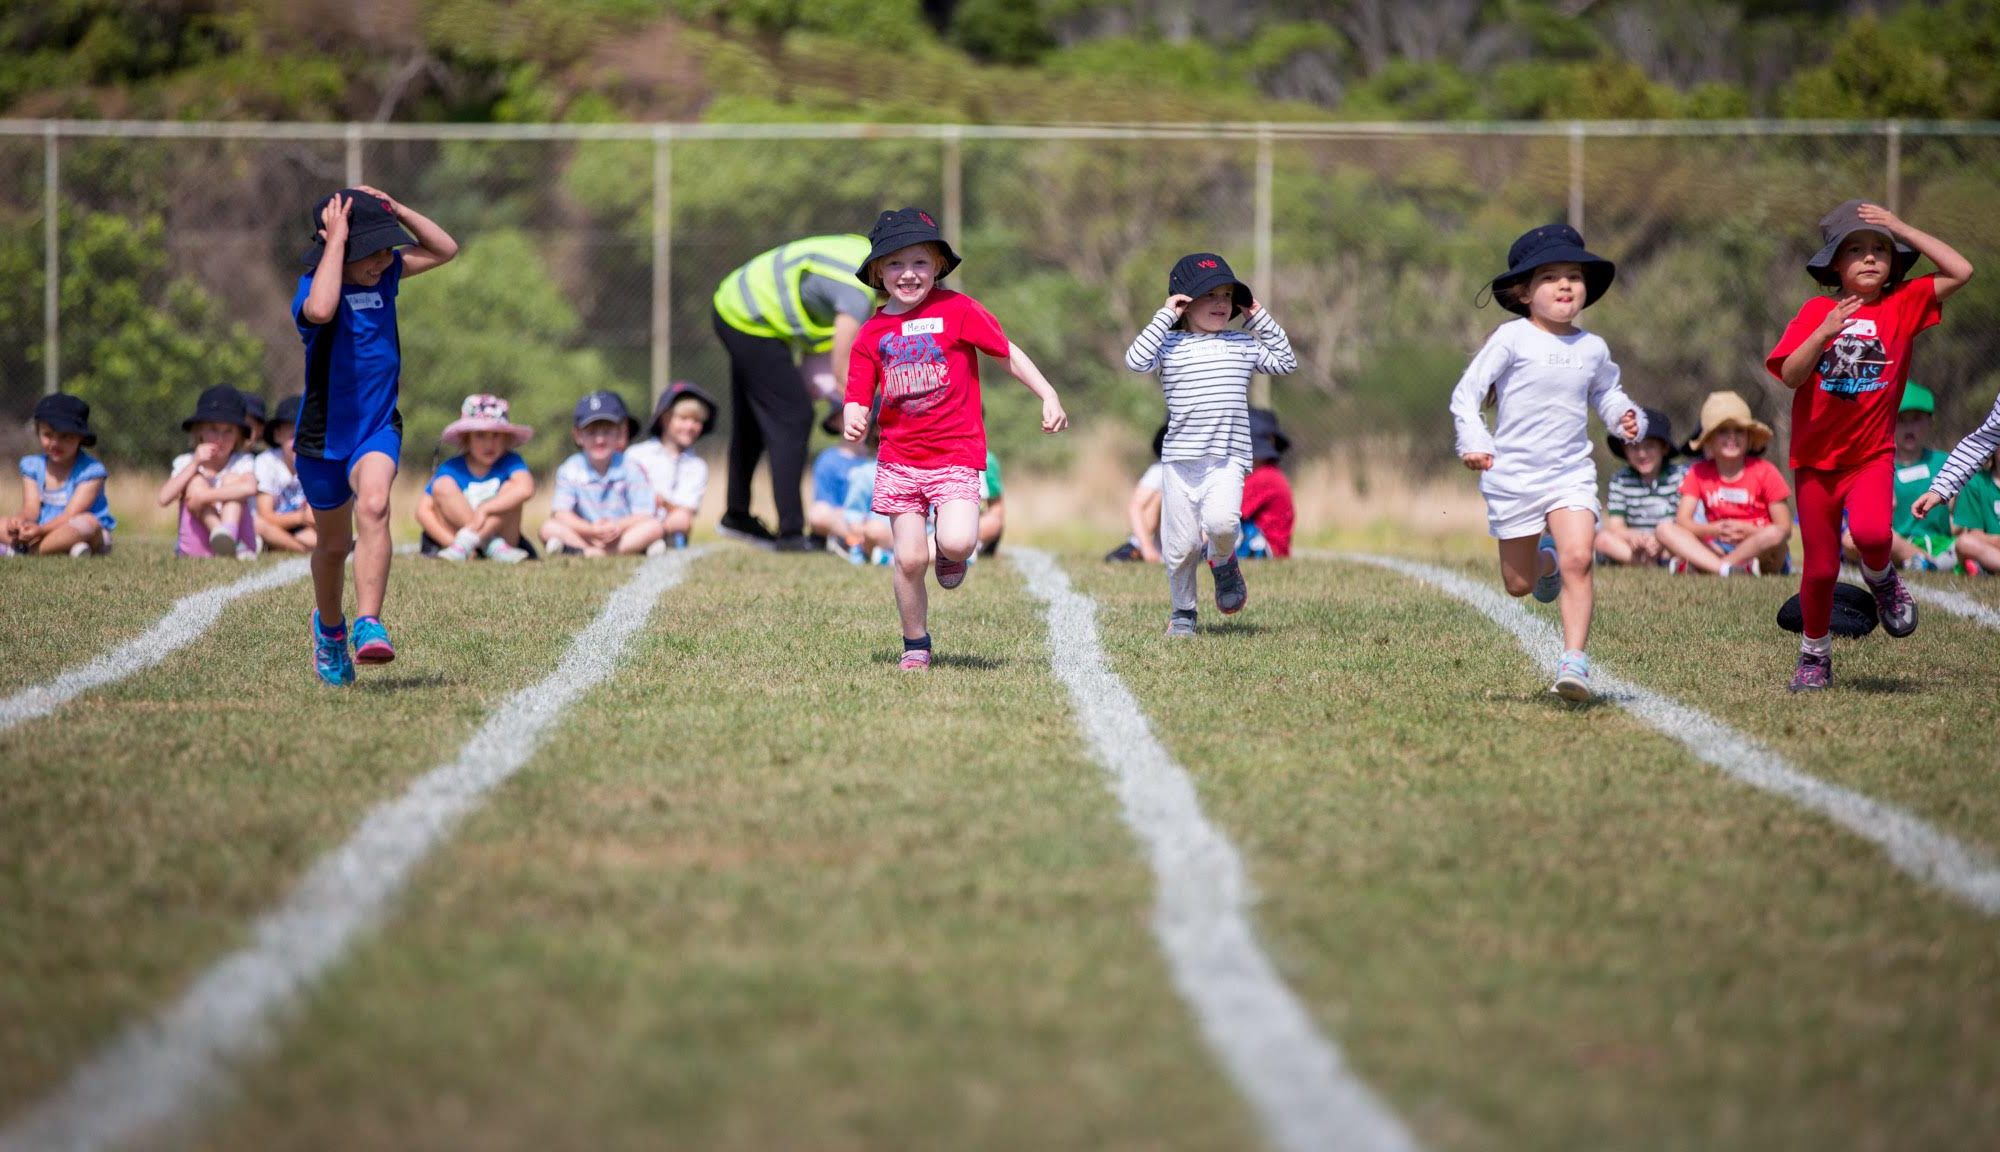 Participation in physical education and sport is important at Wadestown School.